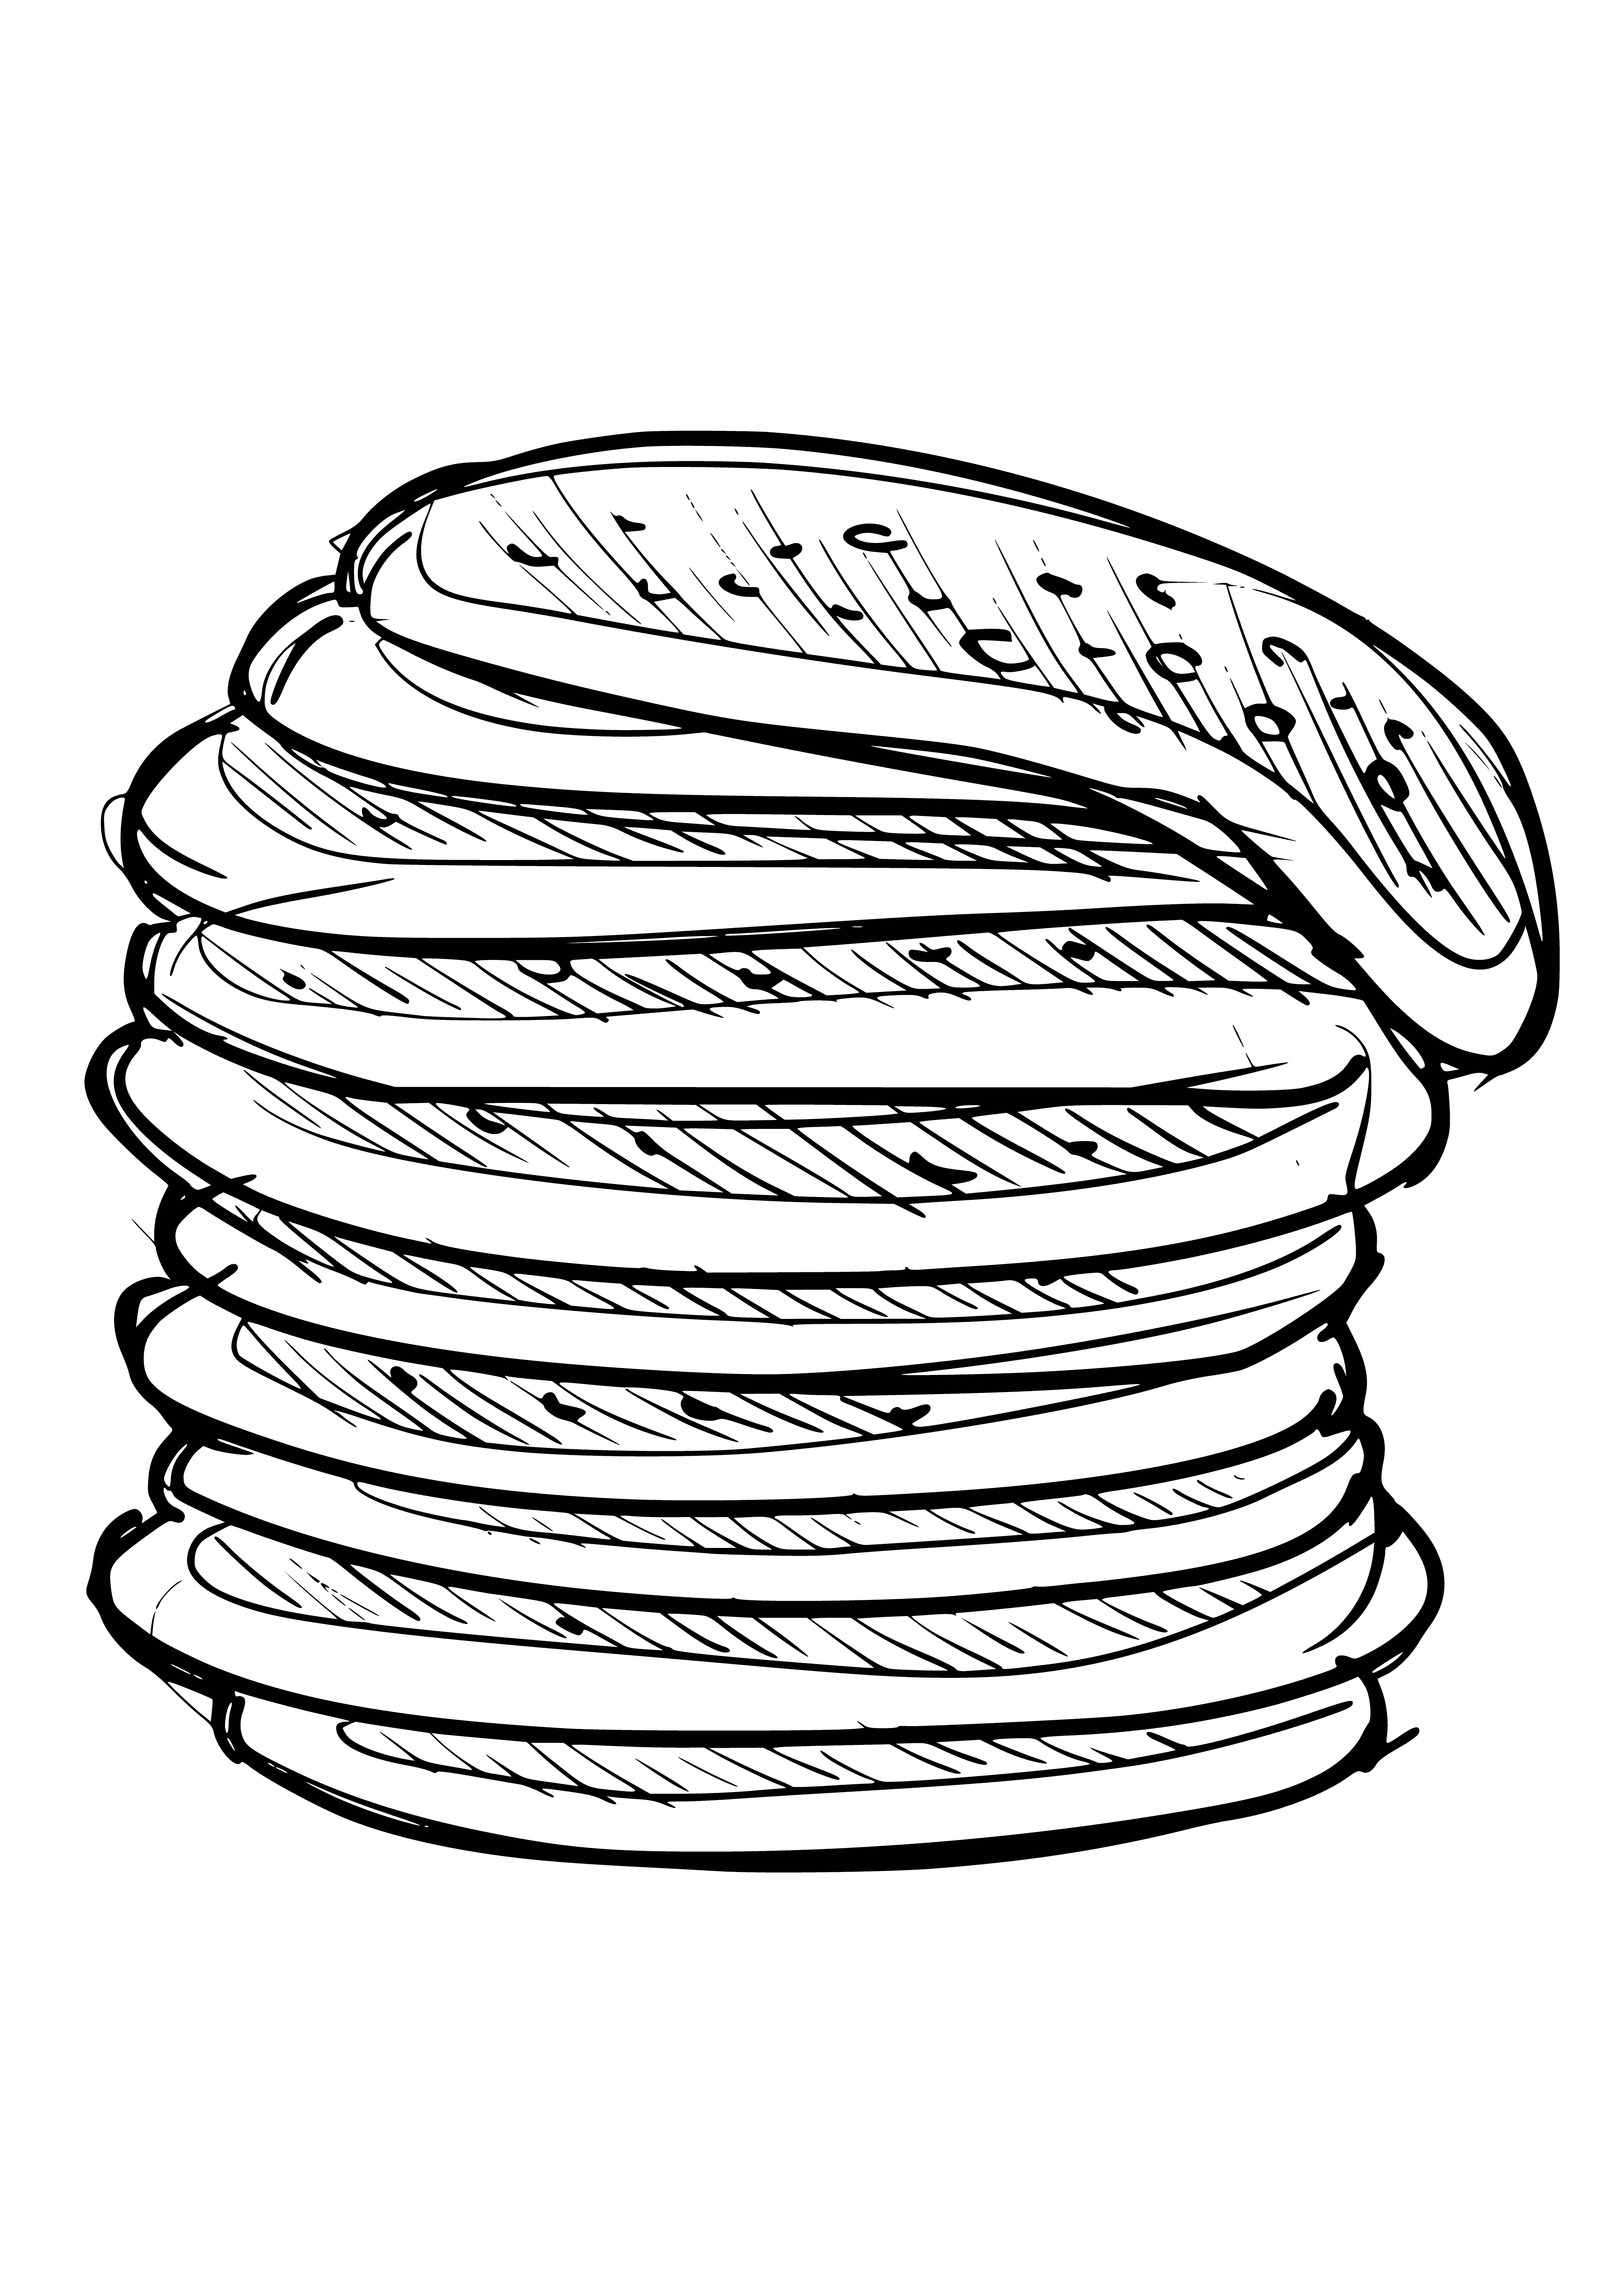 coloring page: A stack of golden-brown pancakes with buttery topping sits on a plate in front of a wintery window. #yum